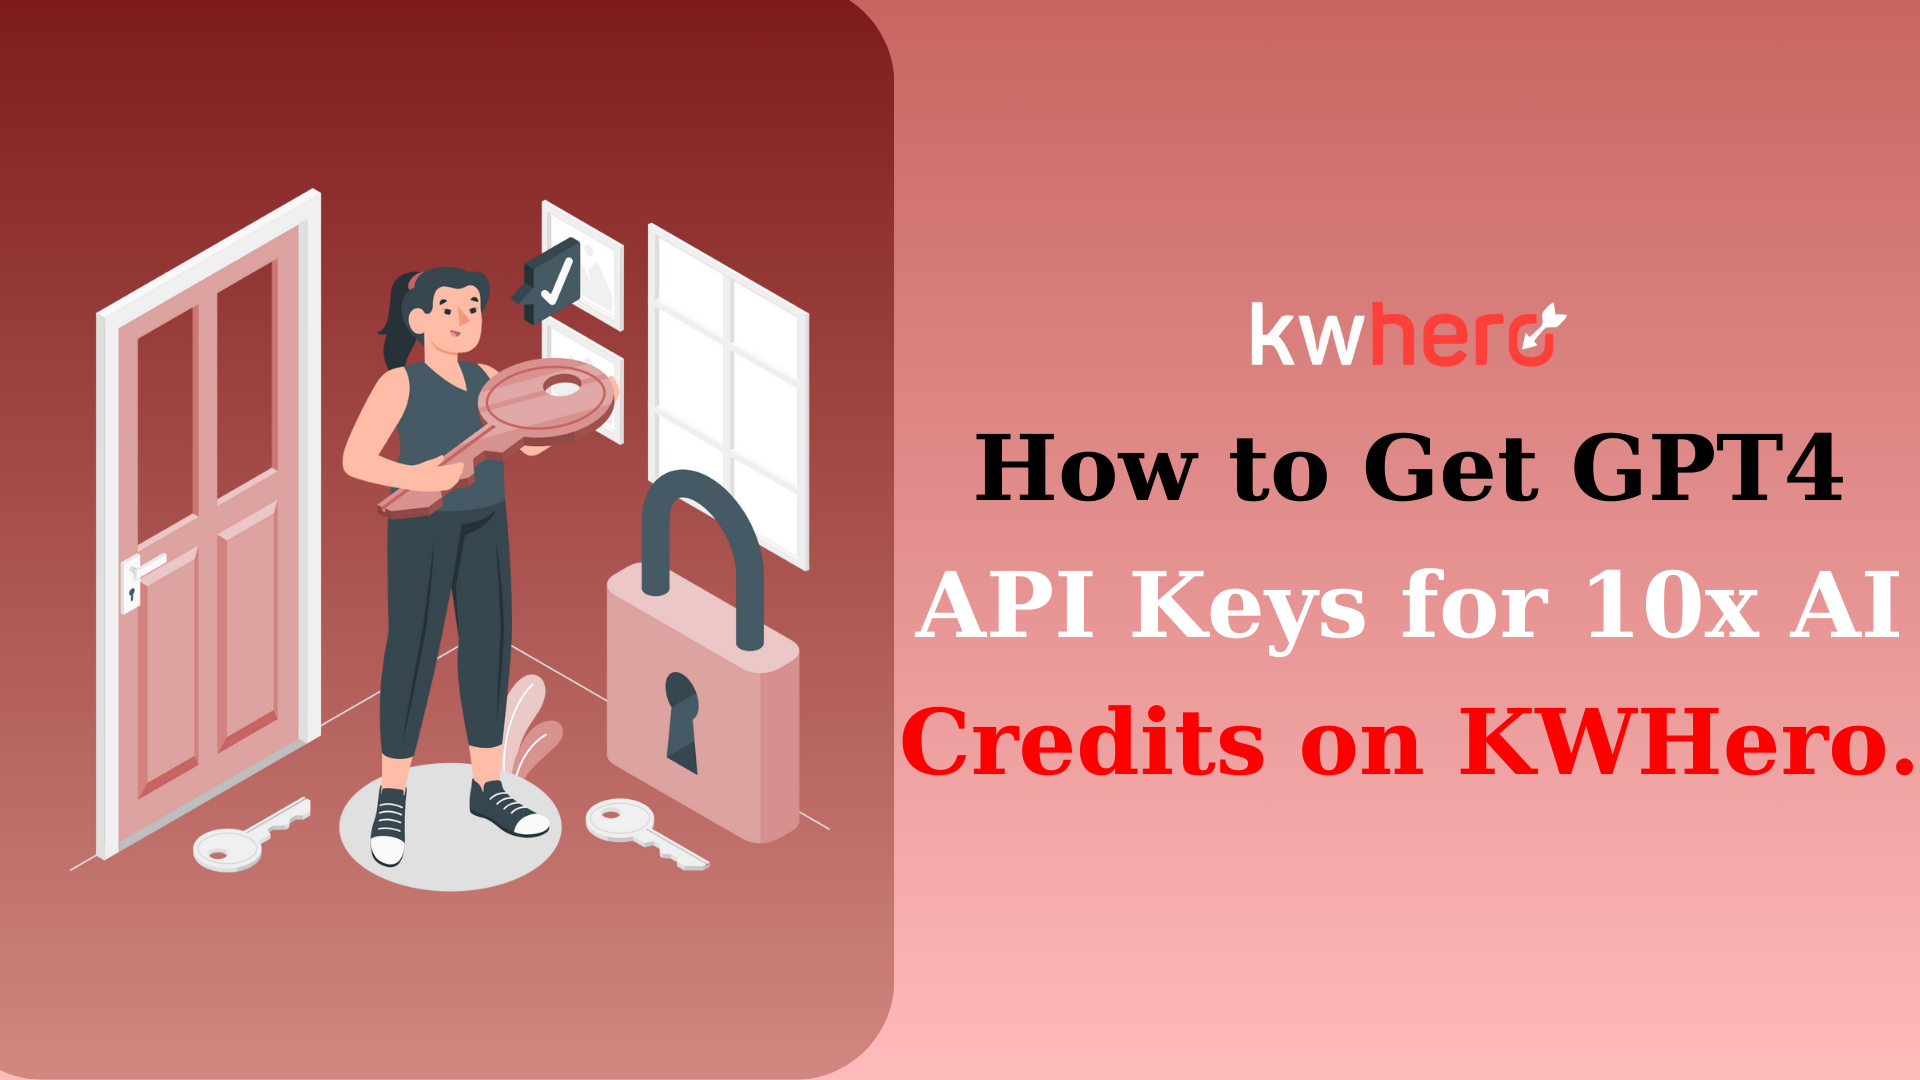 Quick guide to help KWHero users get GPT4 API keys to increase their credit limits.